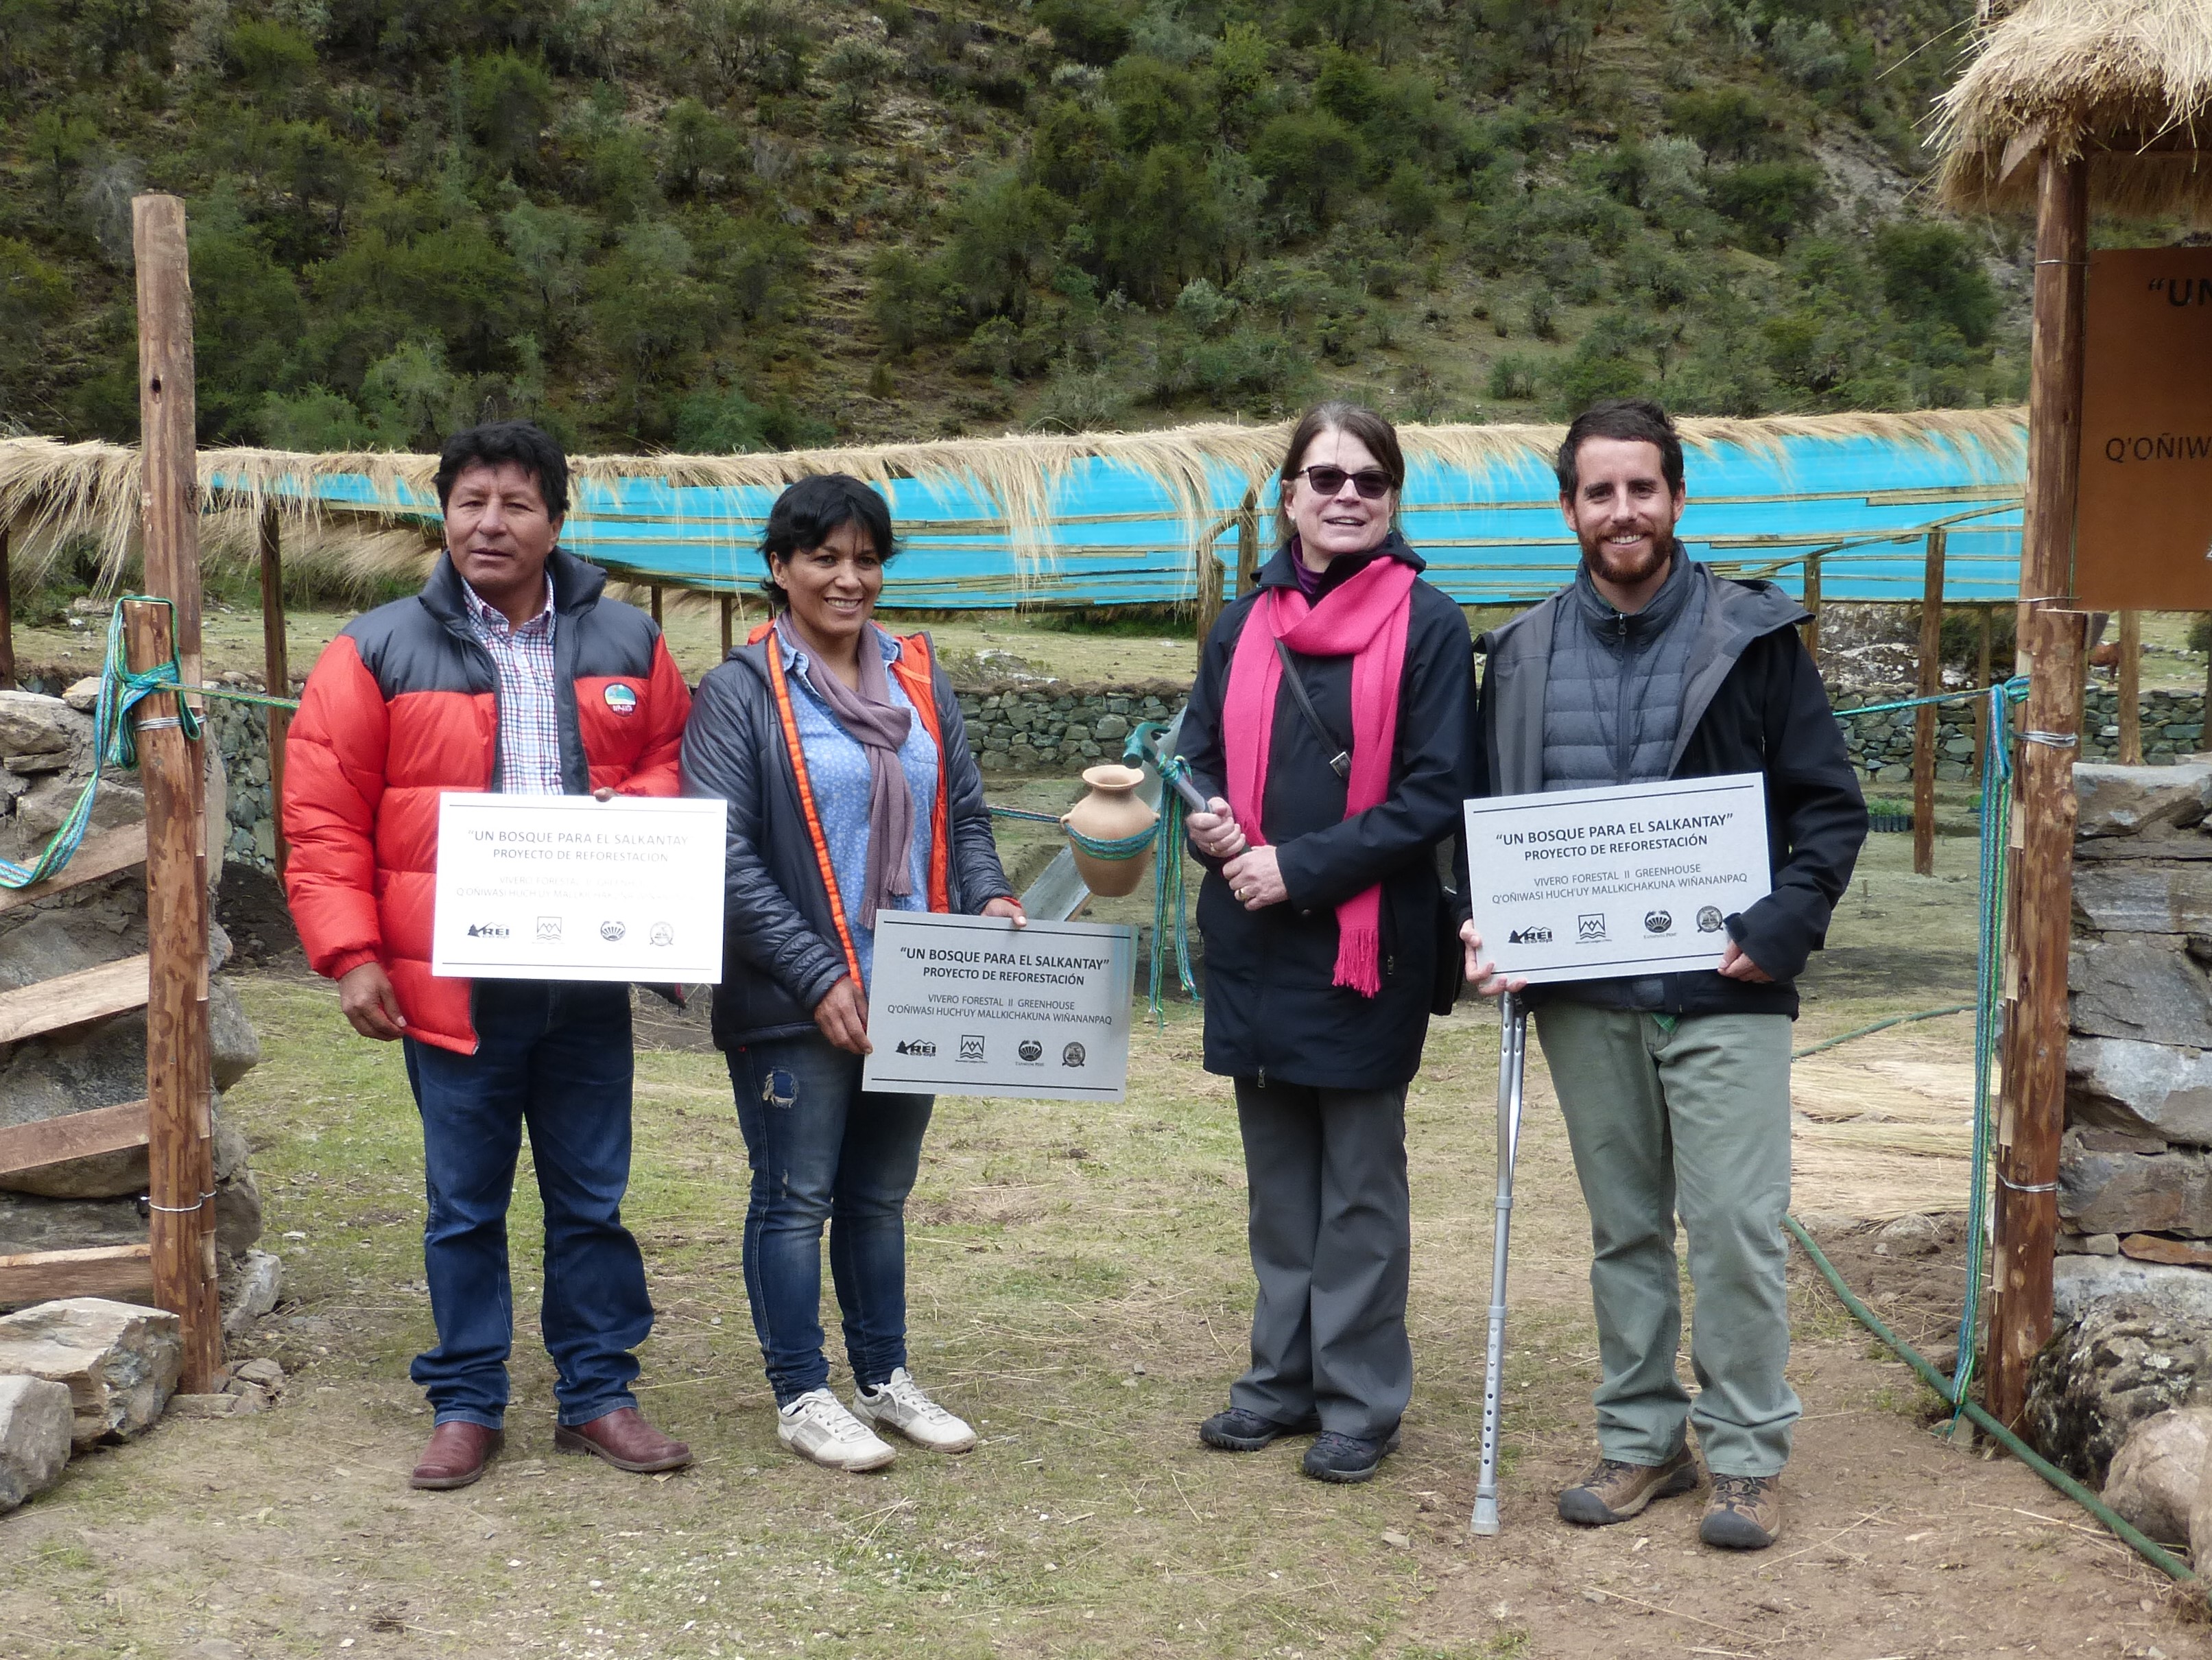 REI Adventures, Mountain Lodges of Peru and Yanapana Peru Open Greenhouse  to Reforest a Machu Picchu Trekking Route